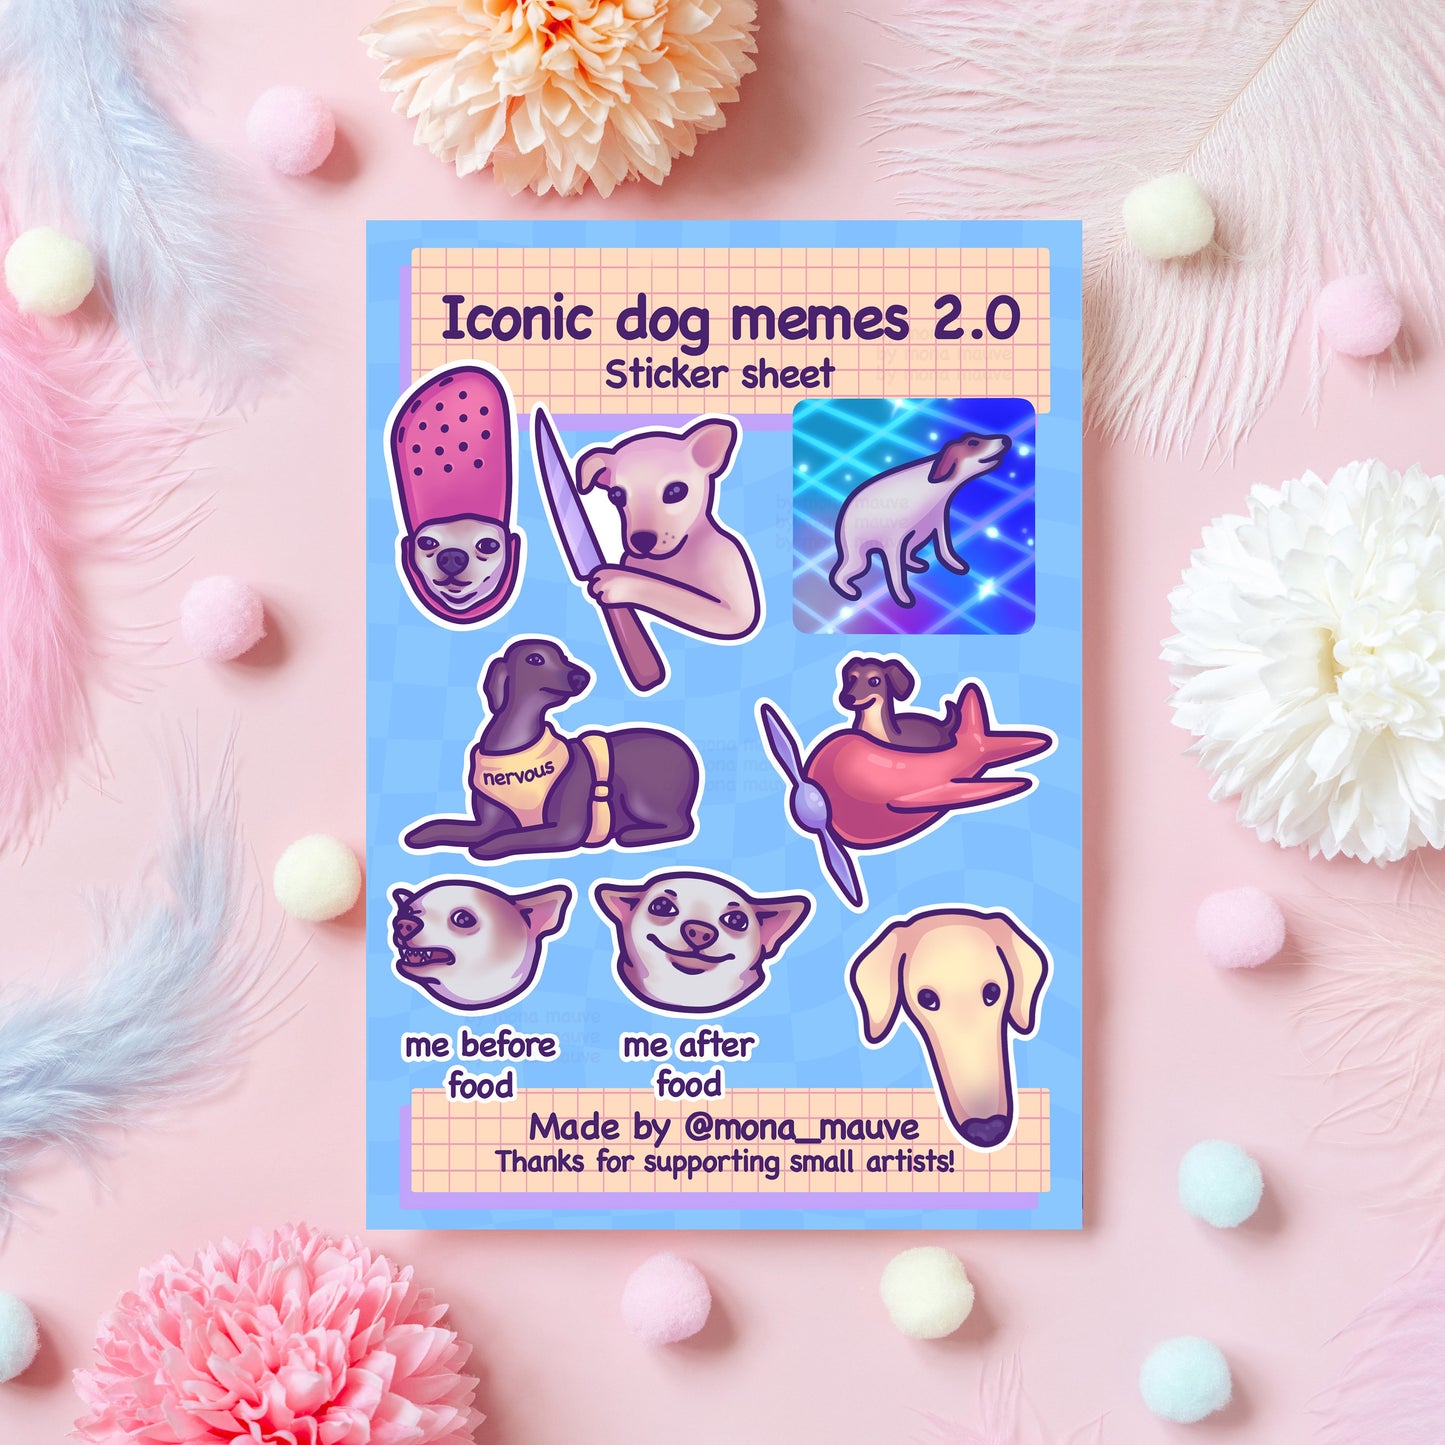 Iconic Dog Memes 2.0 Sticker Sheet | 14 Cute & Funny Recyclable Paper Stickers | Borzoi, Dancing Dog, Wisdom Dog, Angry Chihuahua... | A5